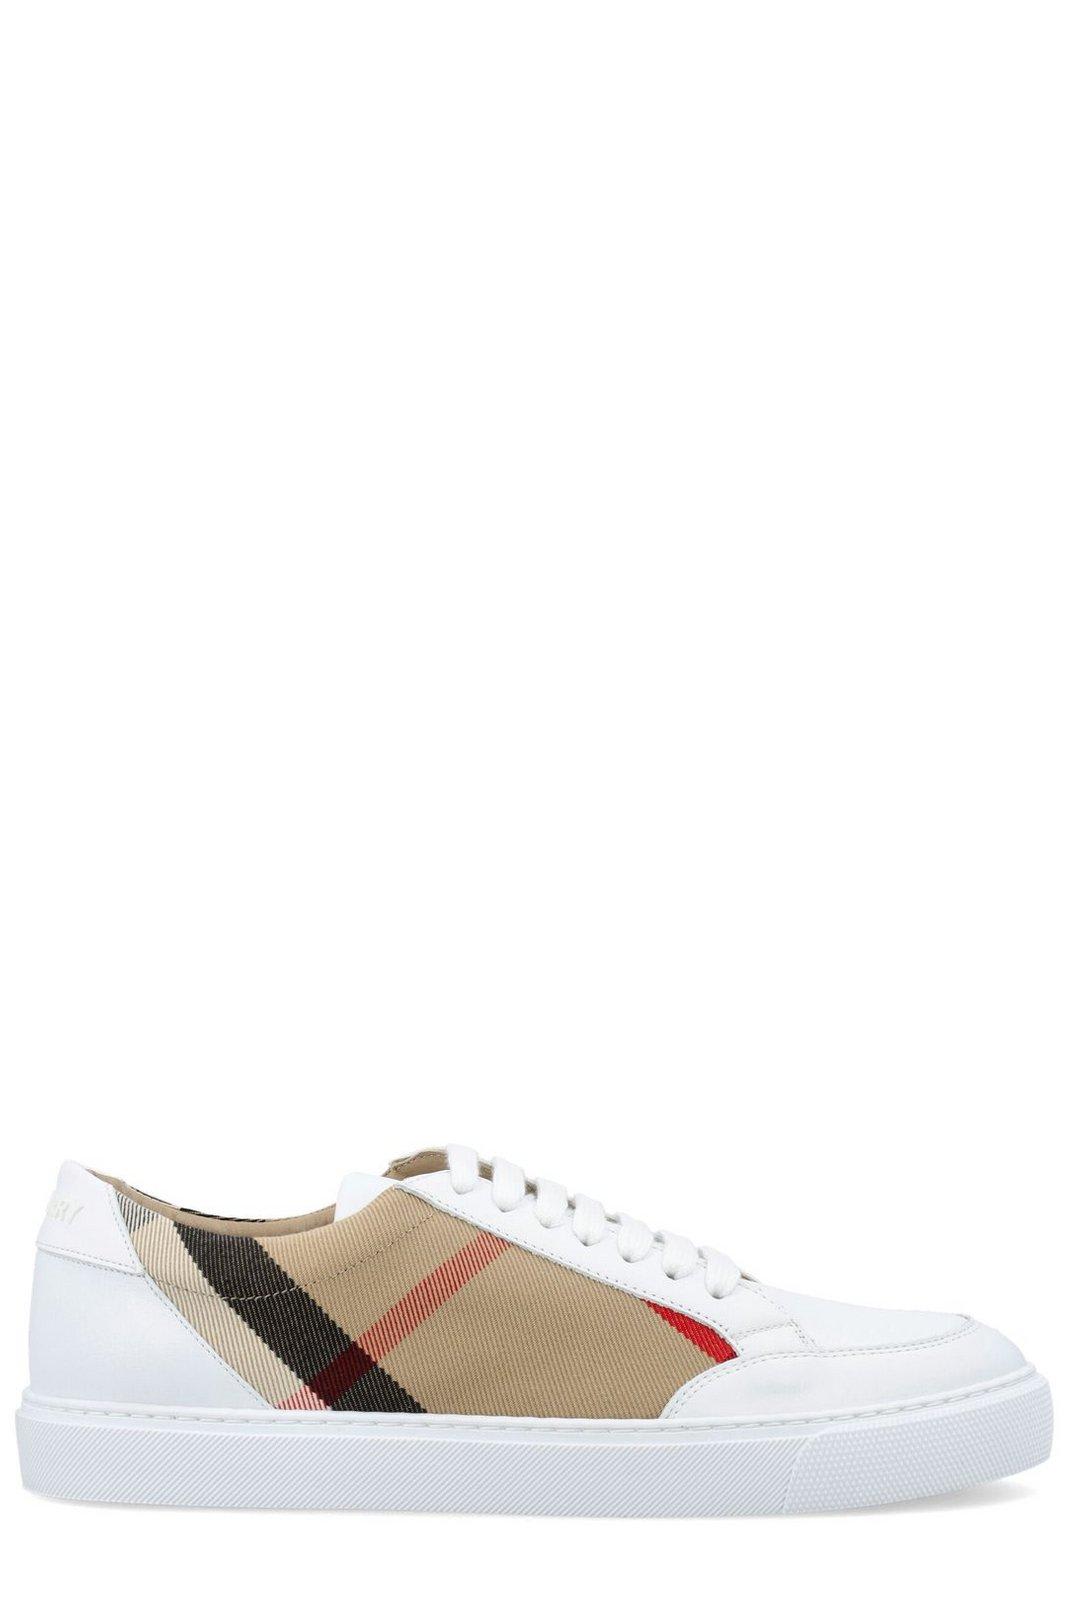 Burberry House Check Lace-up Sneakers